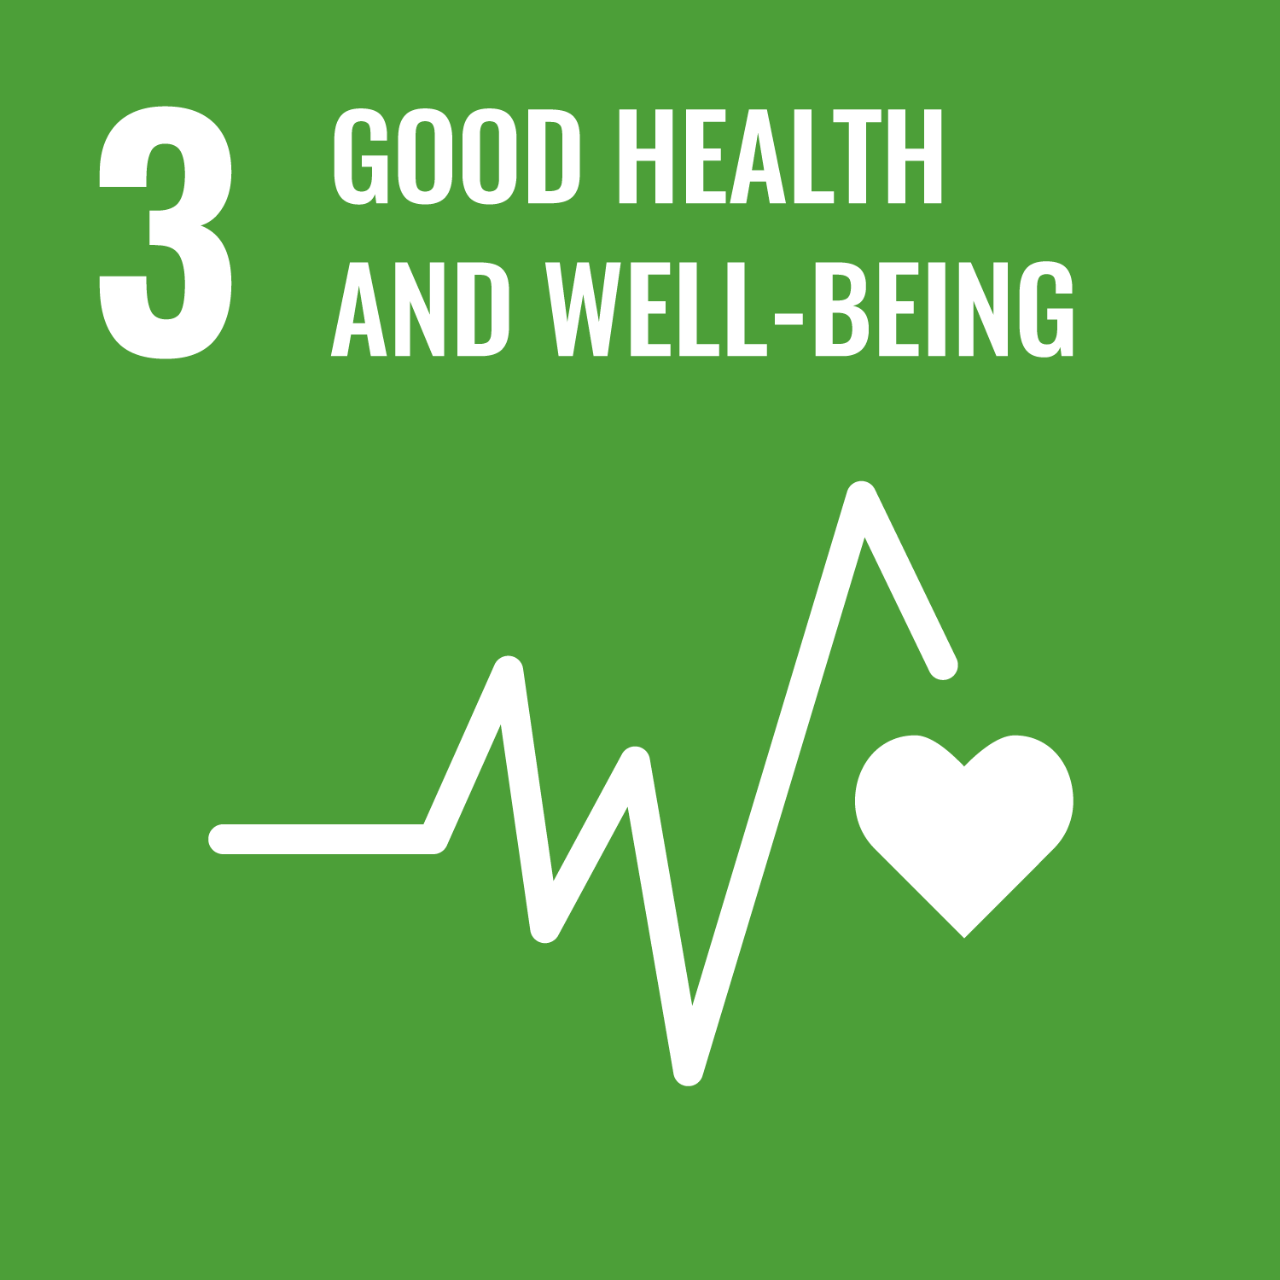 Green icon with graphic of EKG waves and heart to represent UNSDG Goal 3: Good Health and Well-being.